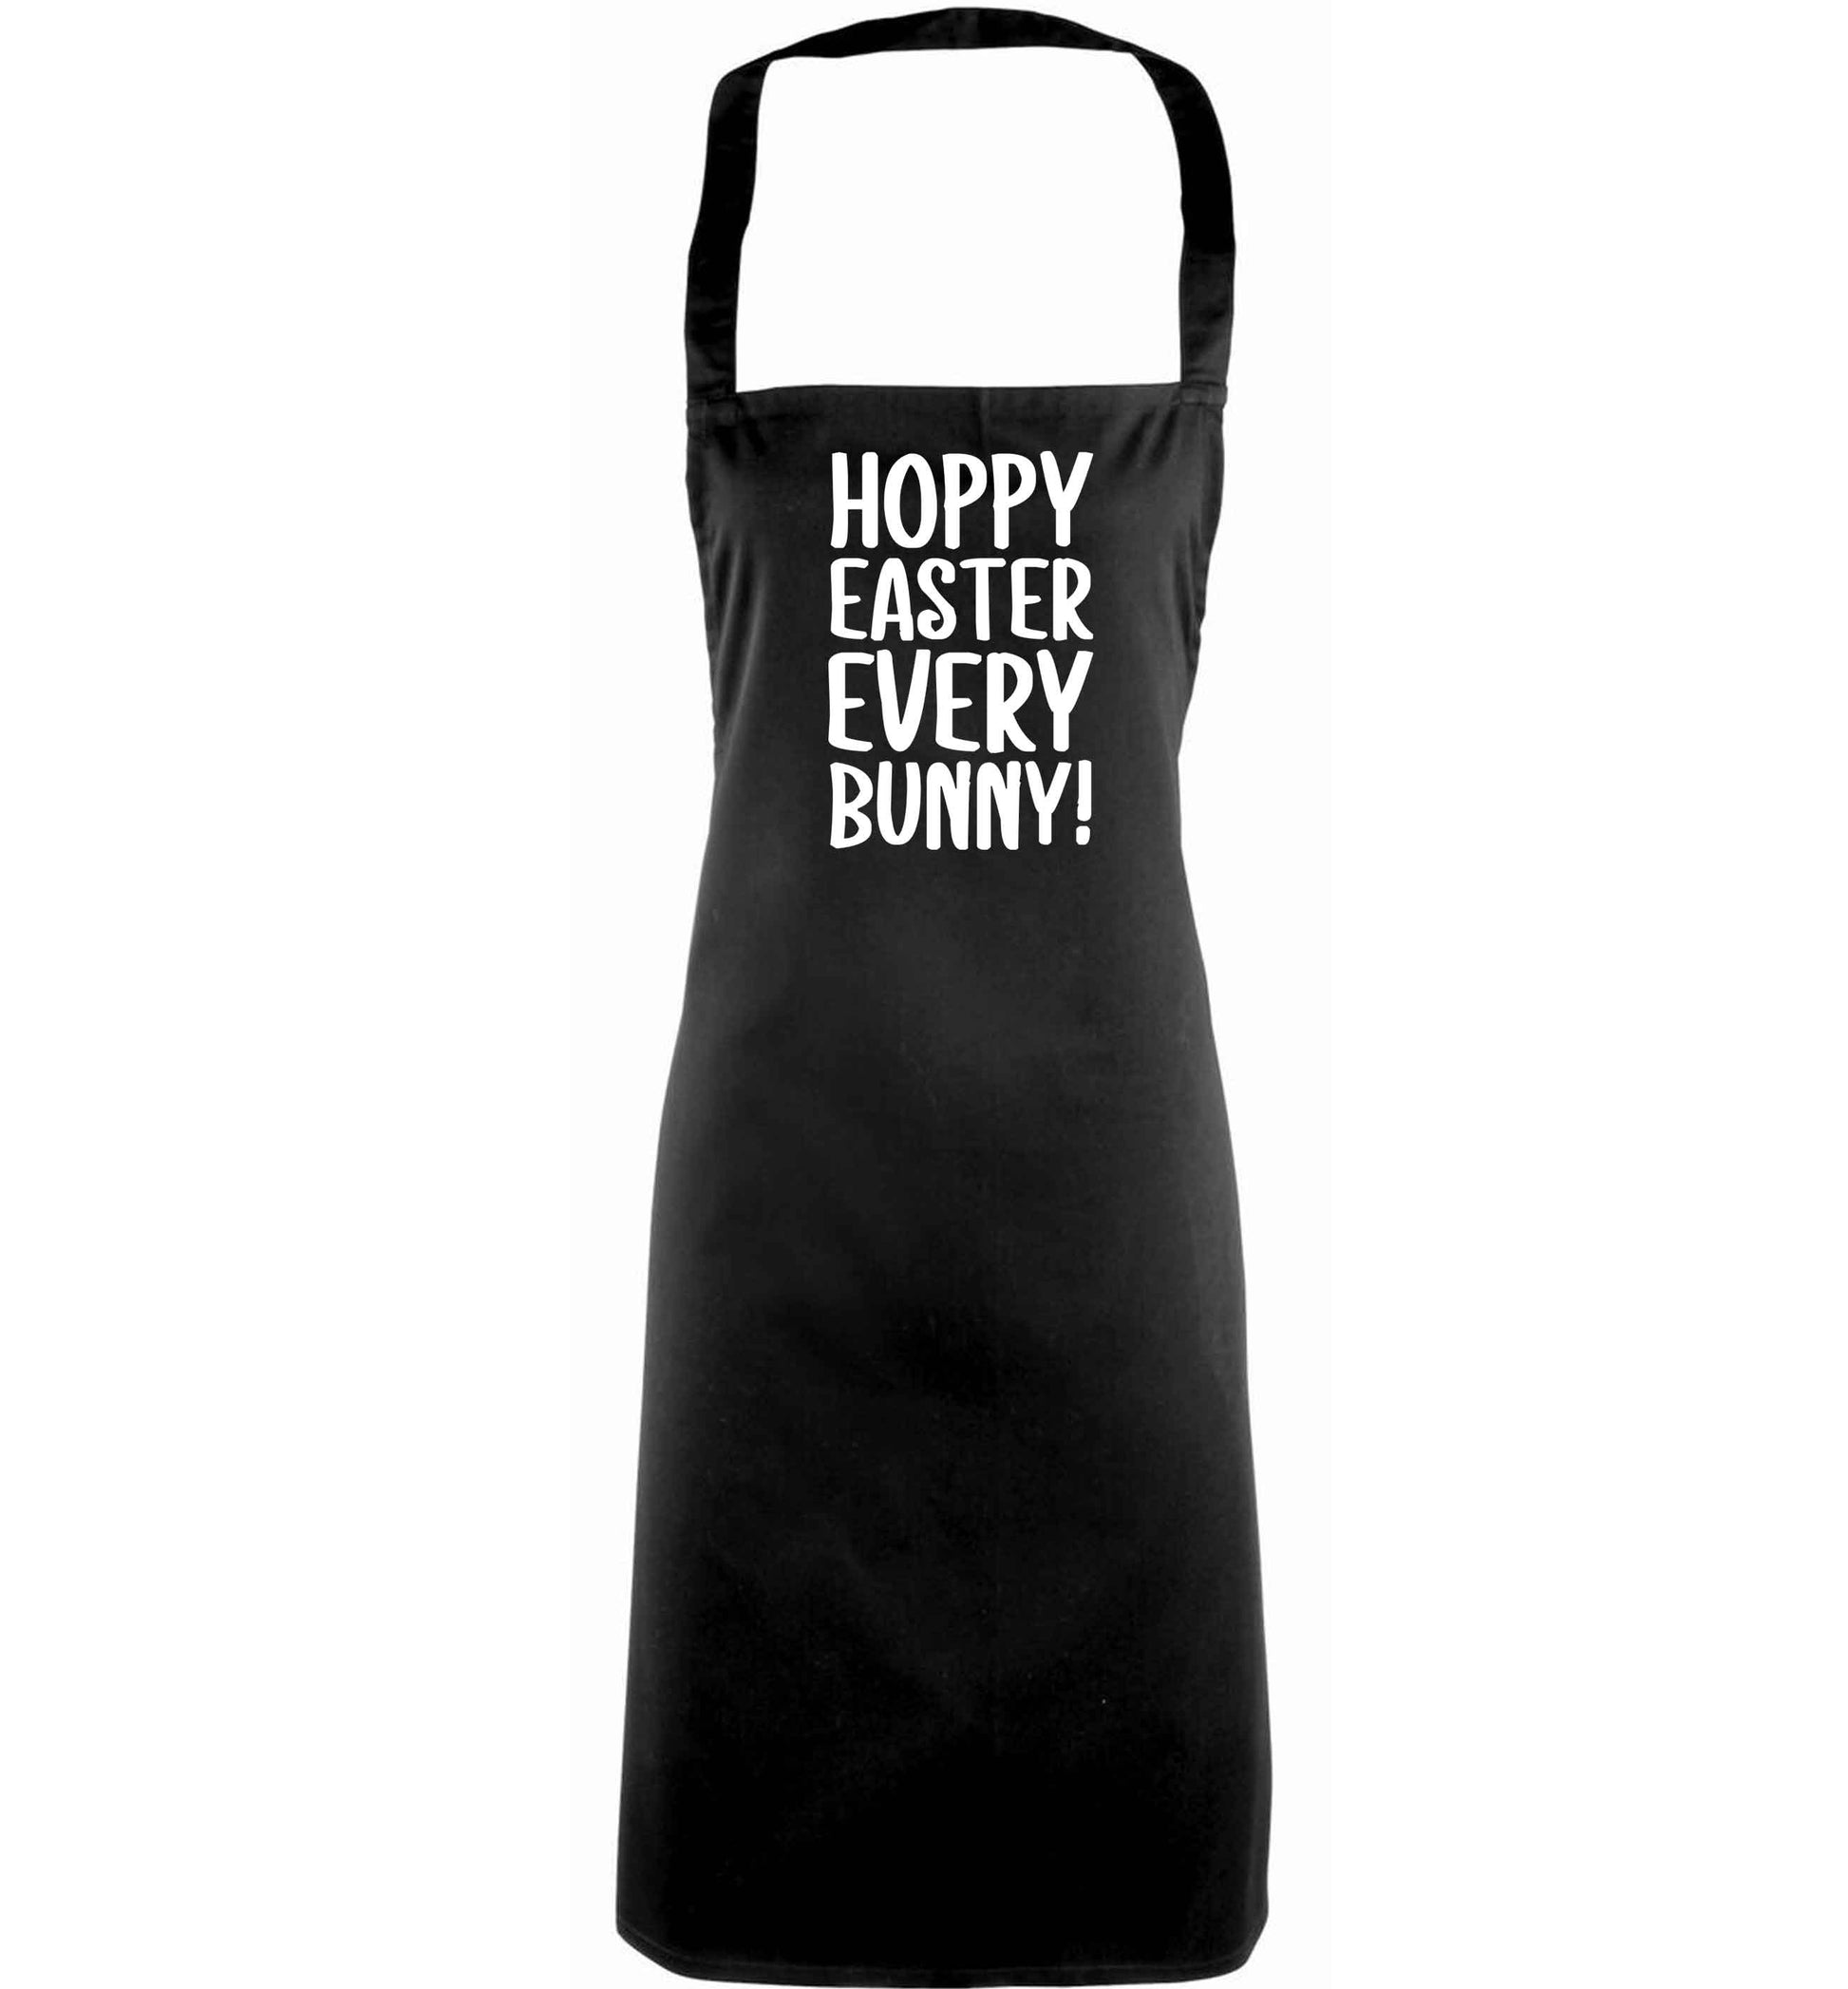 Hoppy Easter every bunny! adults black apron